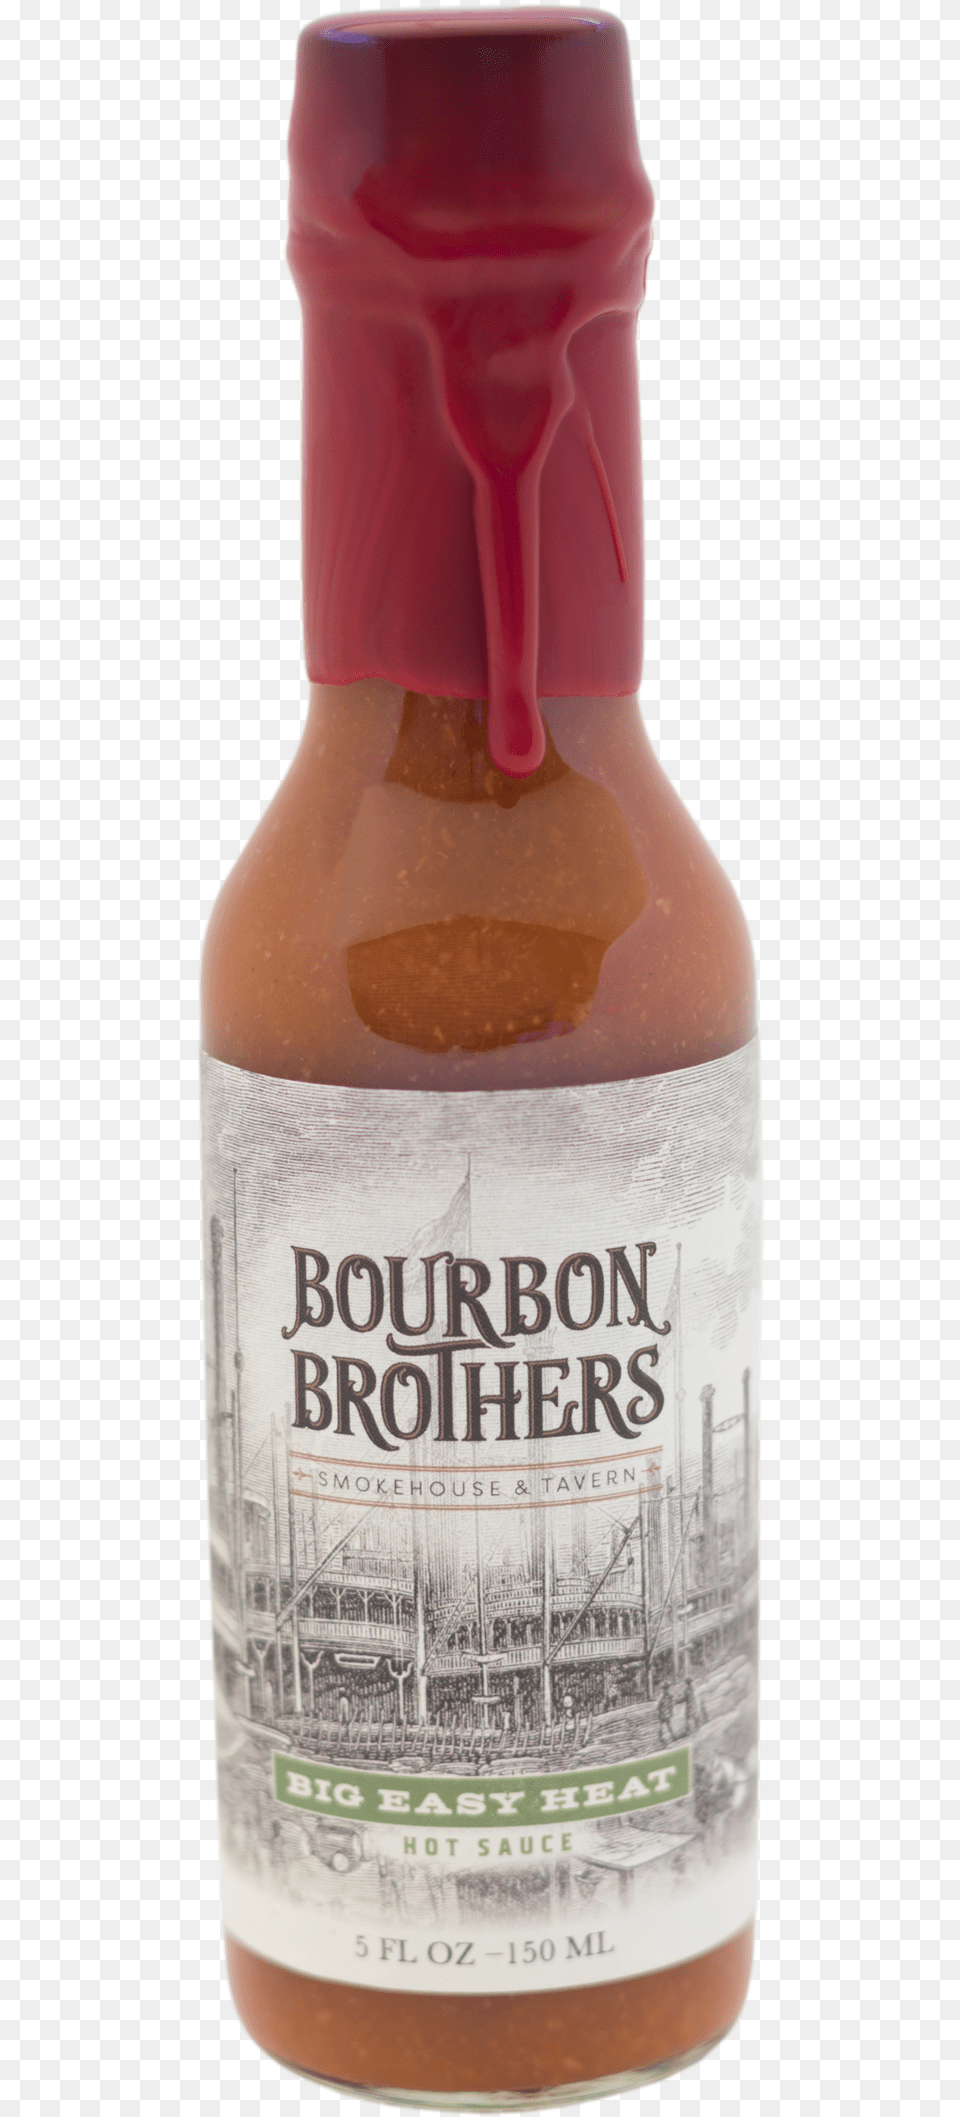 Bourbonbrothers Bigeasyheat Cutout Copy Glass Bottle, Food, Ketchup, Alcohol, Beer Png